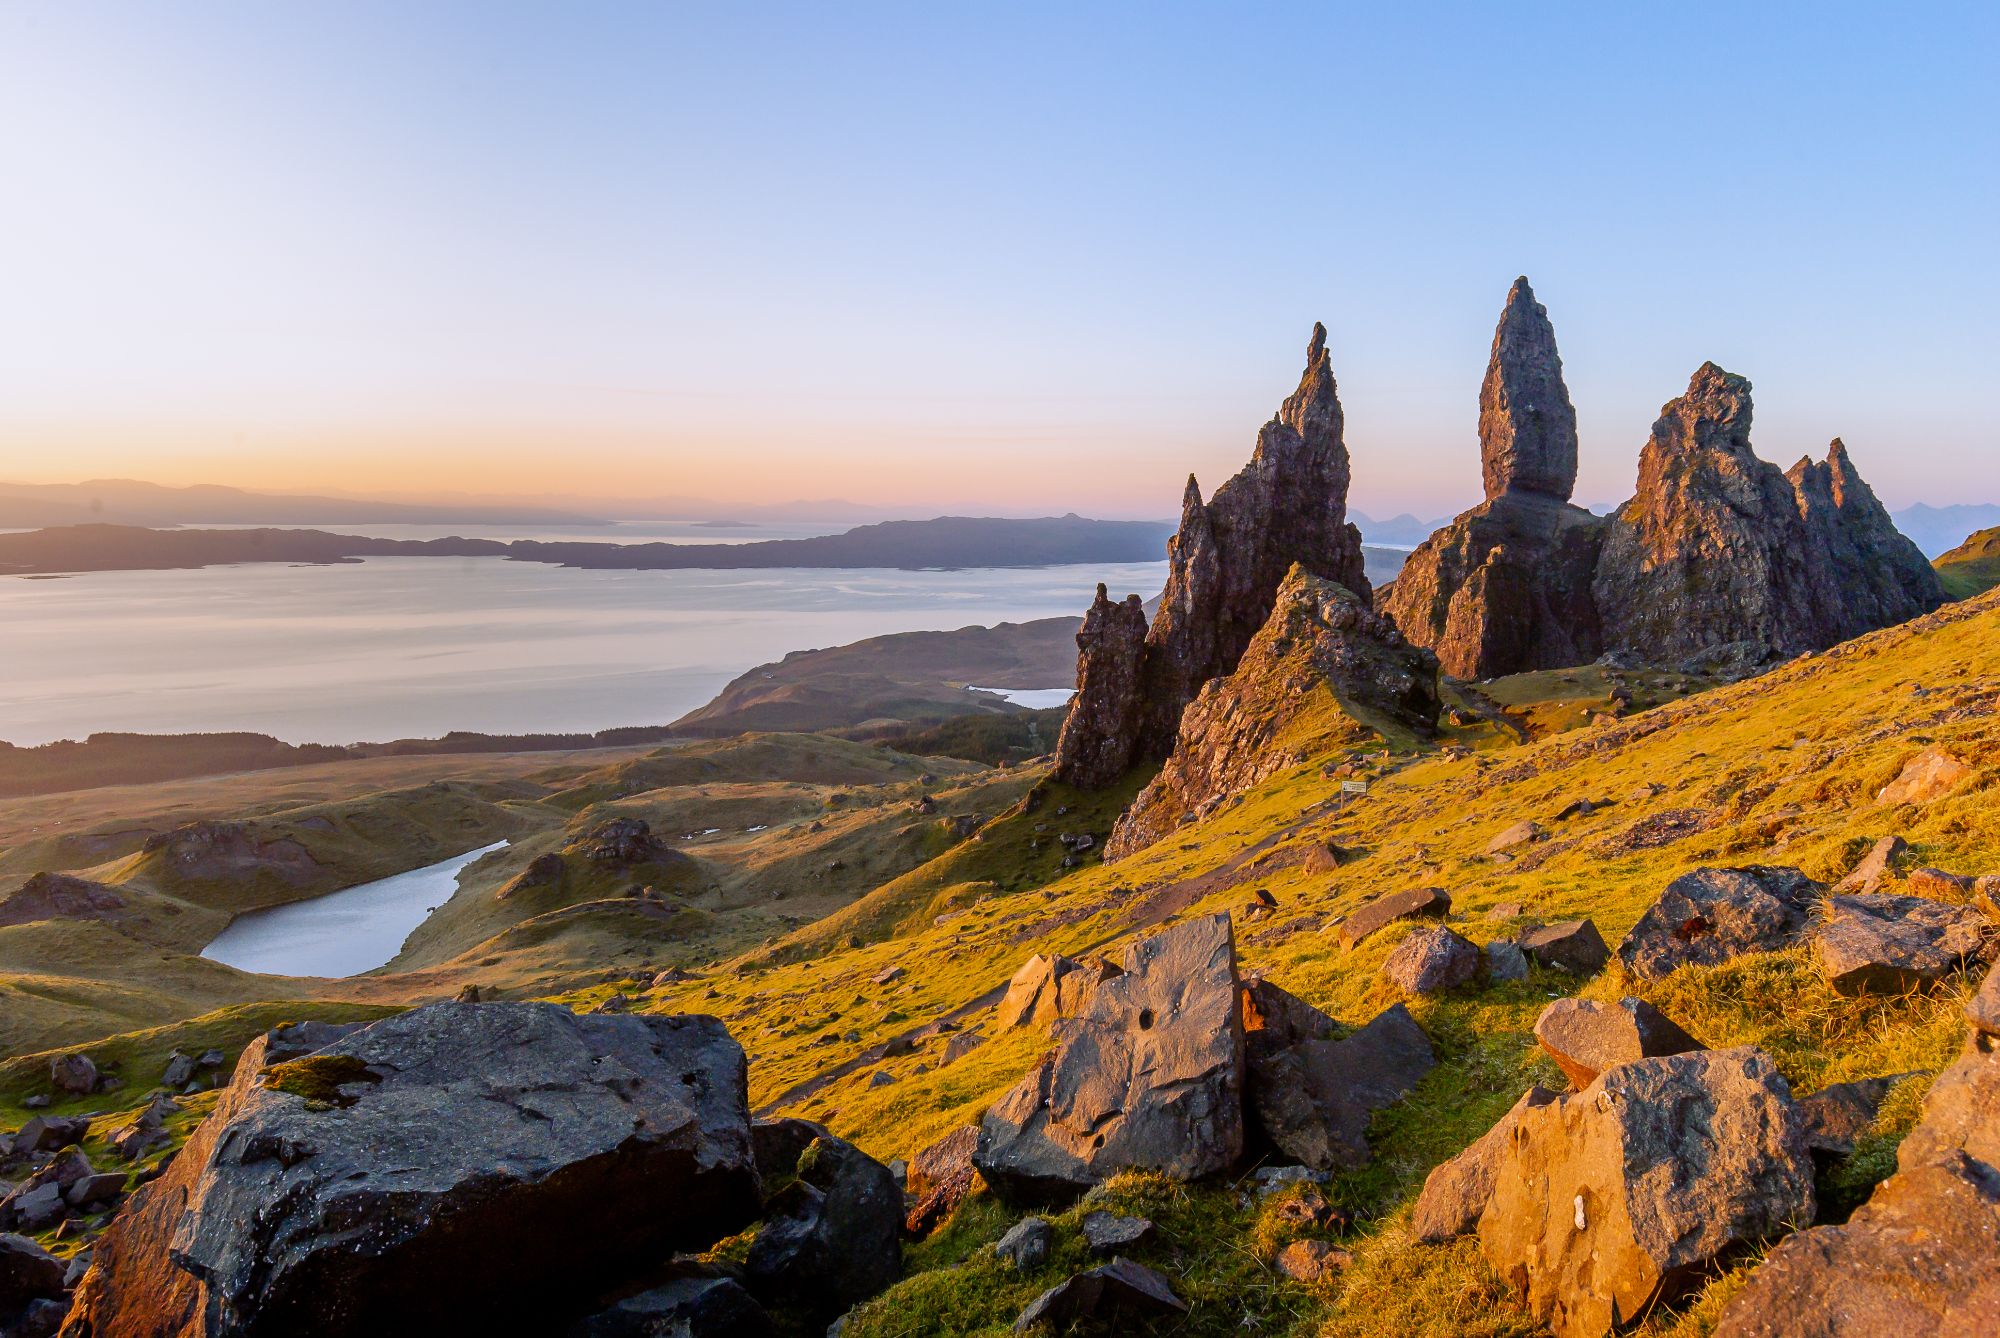 The Old Man of Storr is photographed in the morning golden hour.